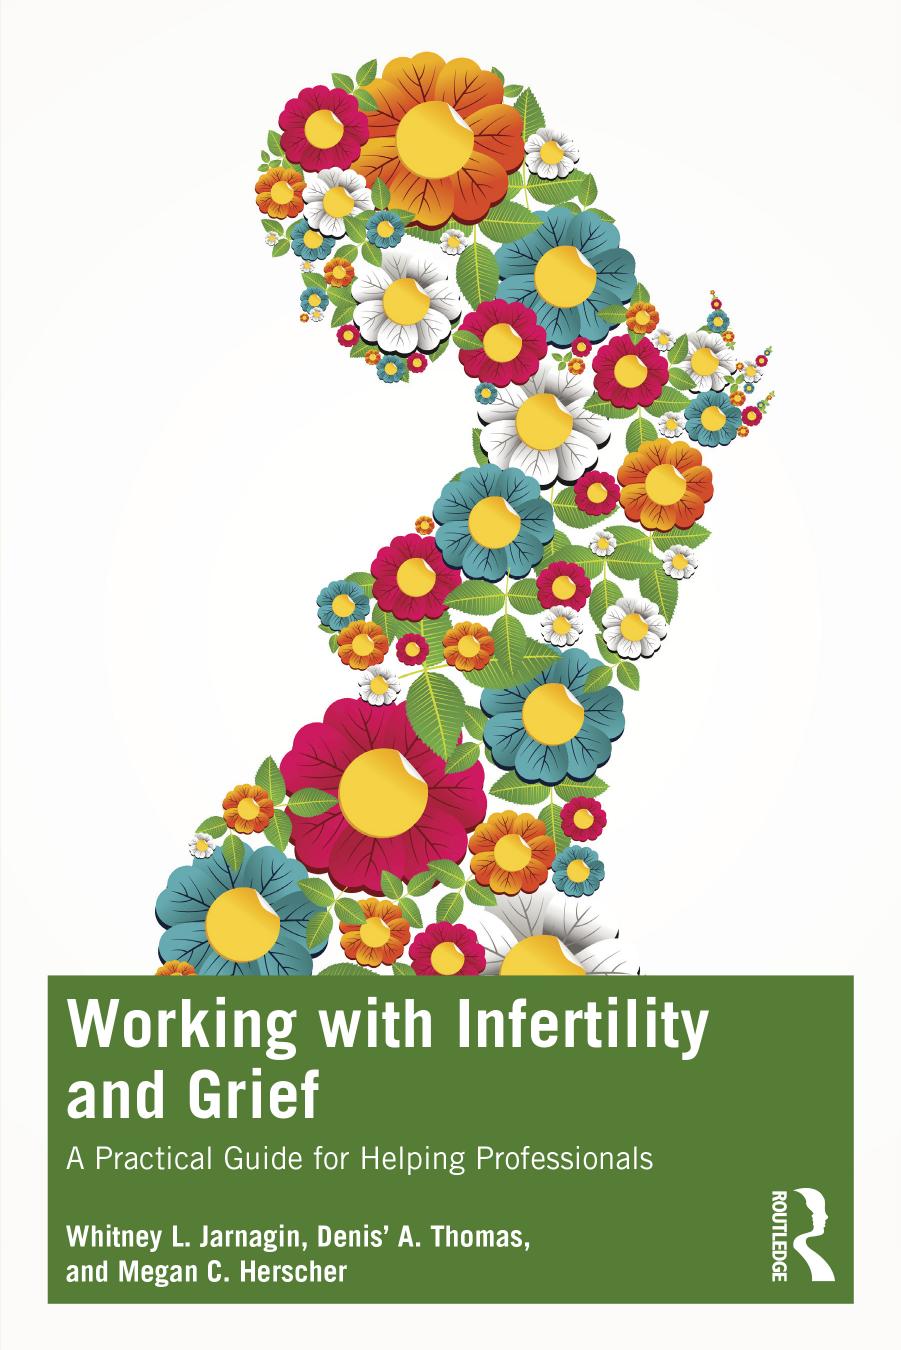 Working with Infertility and Grief: A Practical Guide for Helping Professionals by Whitney L. Jarnagin Denis’ A. Thomas Megan C. Herscher